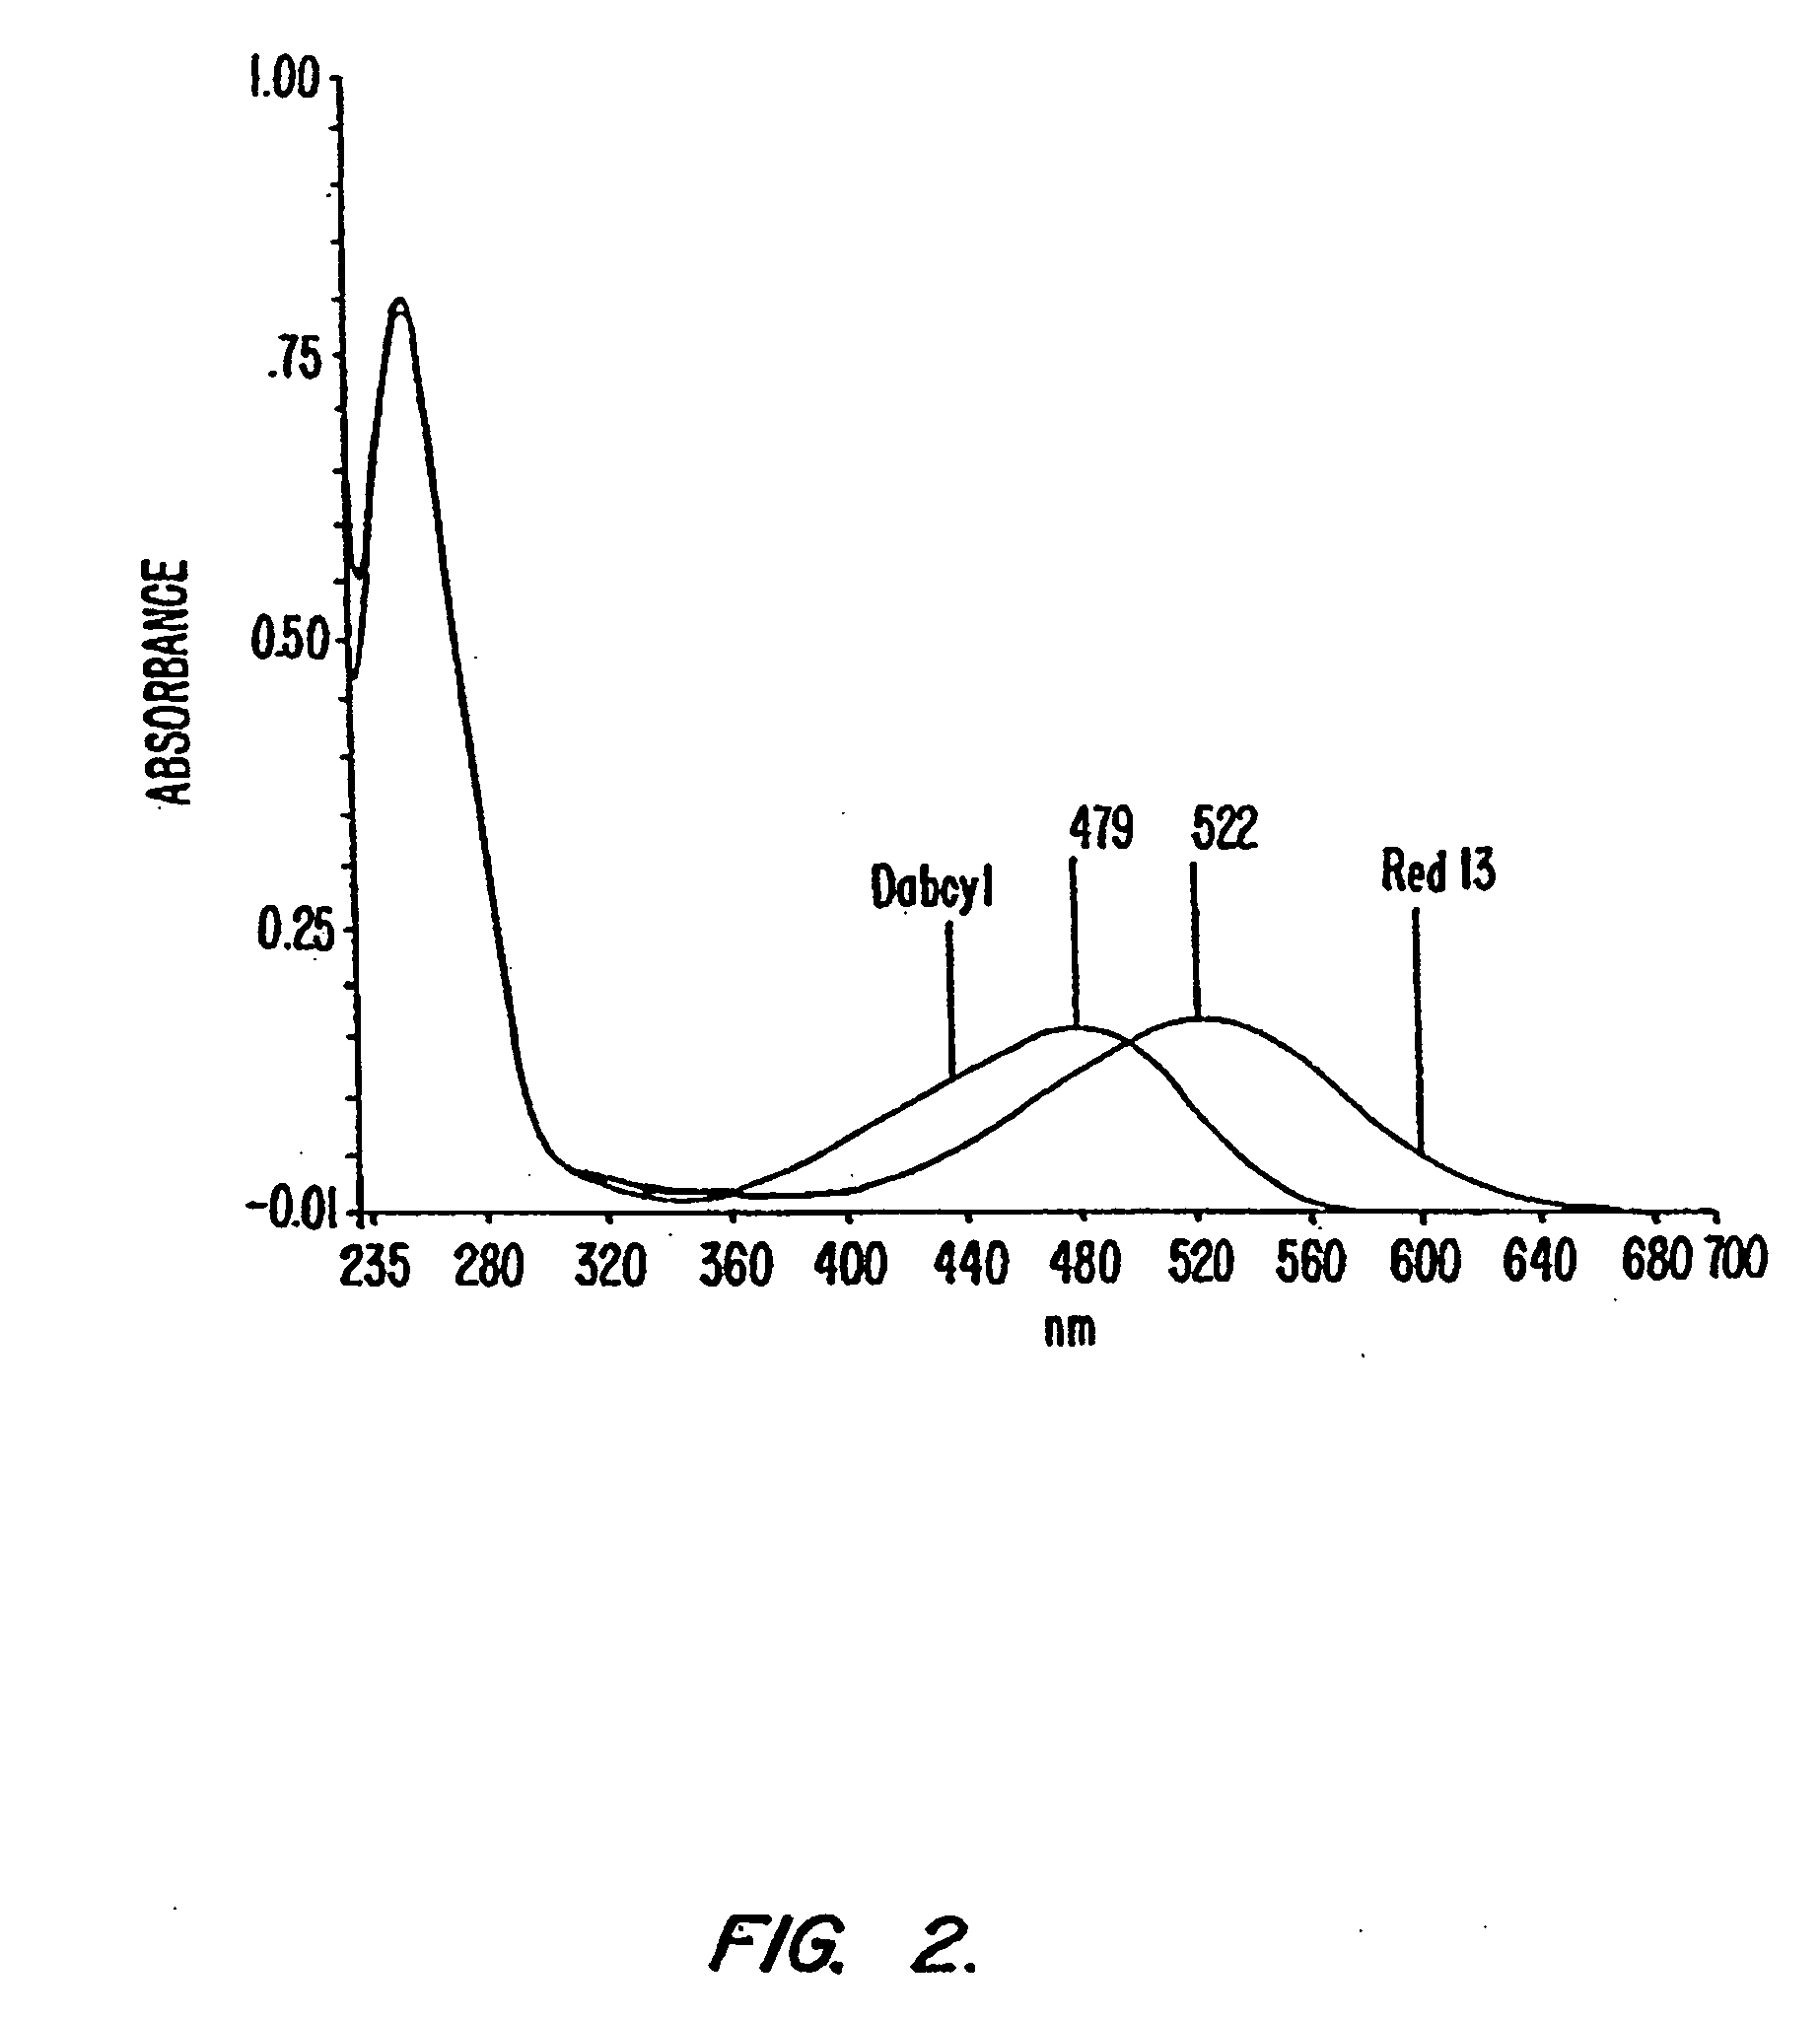 Fluorescent quenching detection reagents and methods